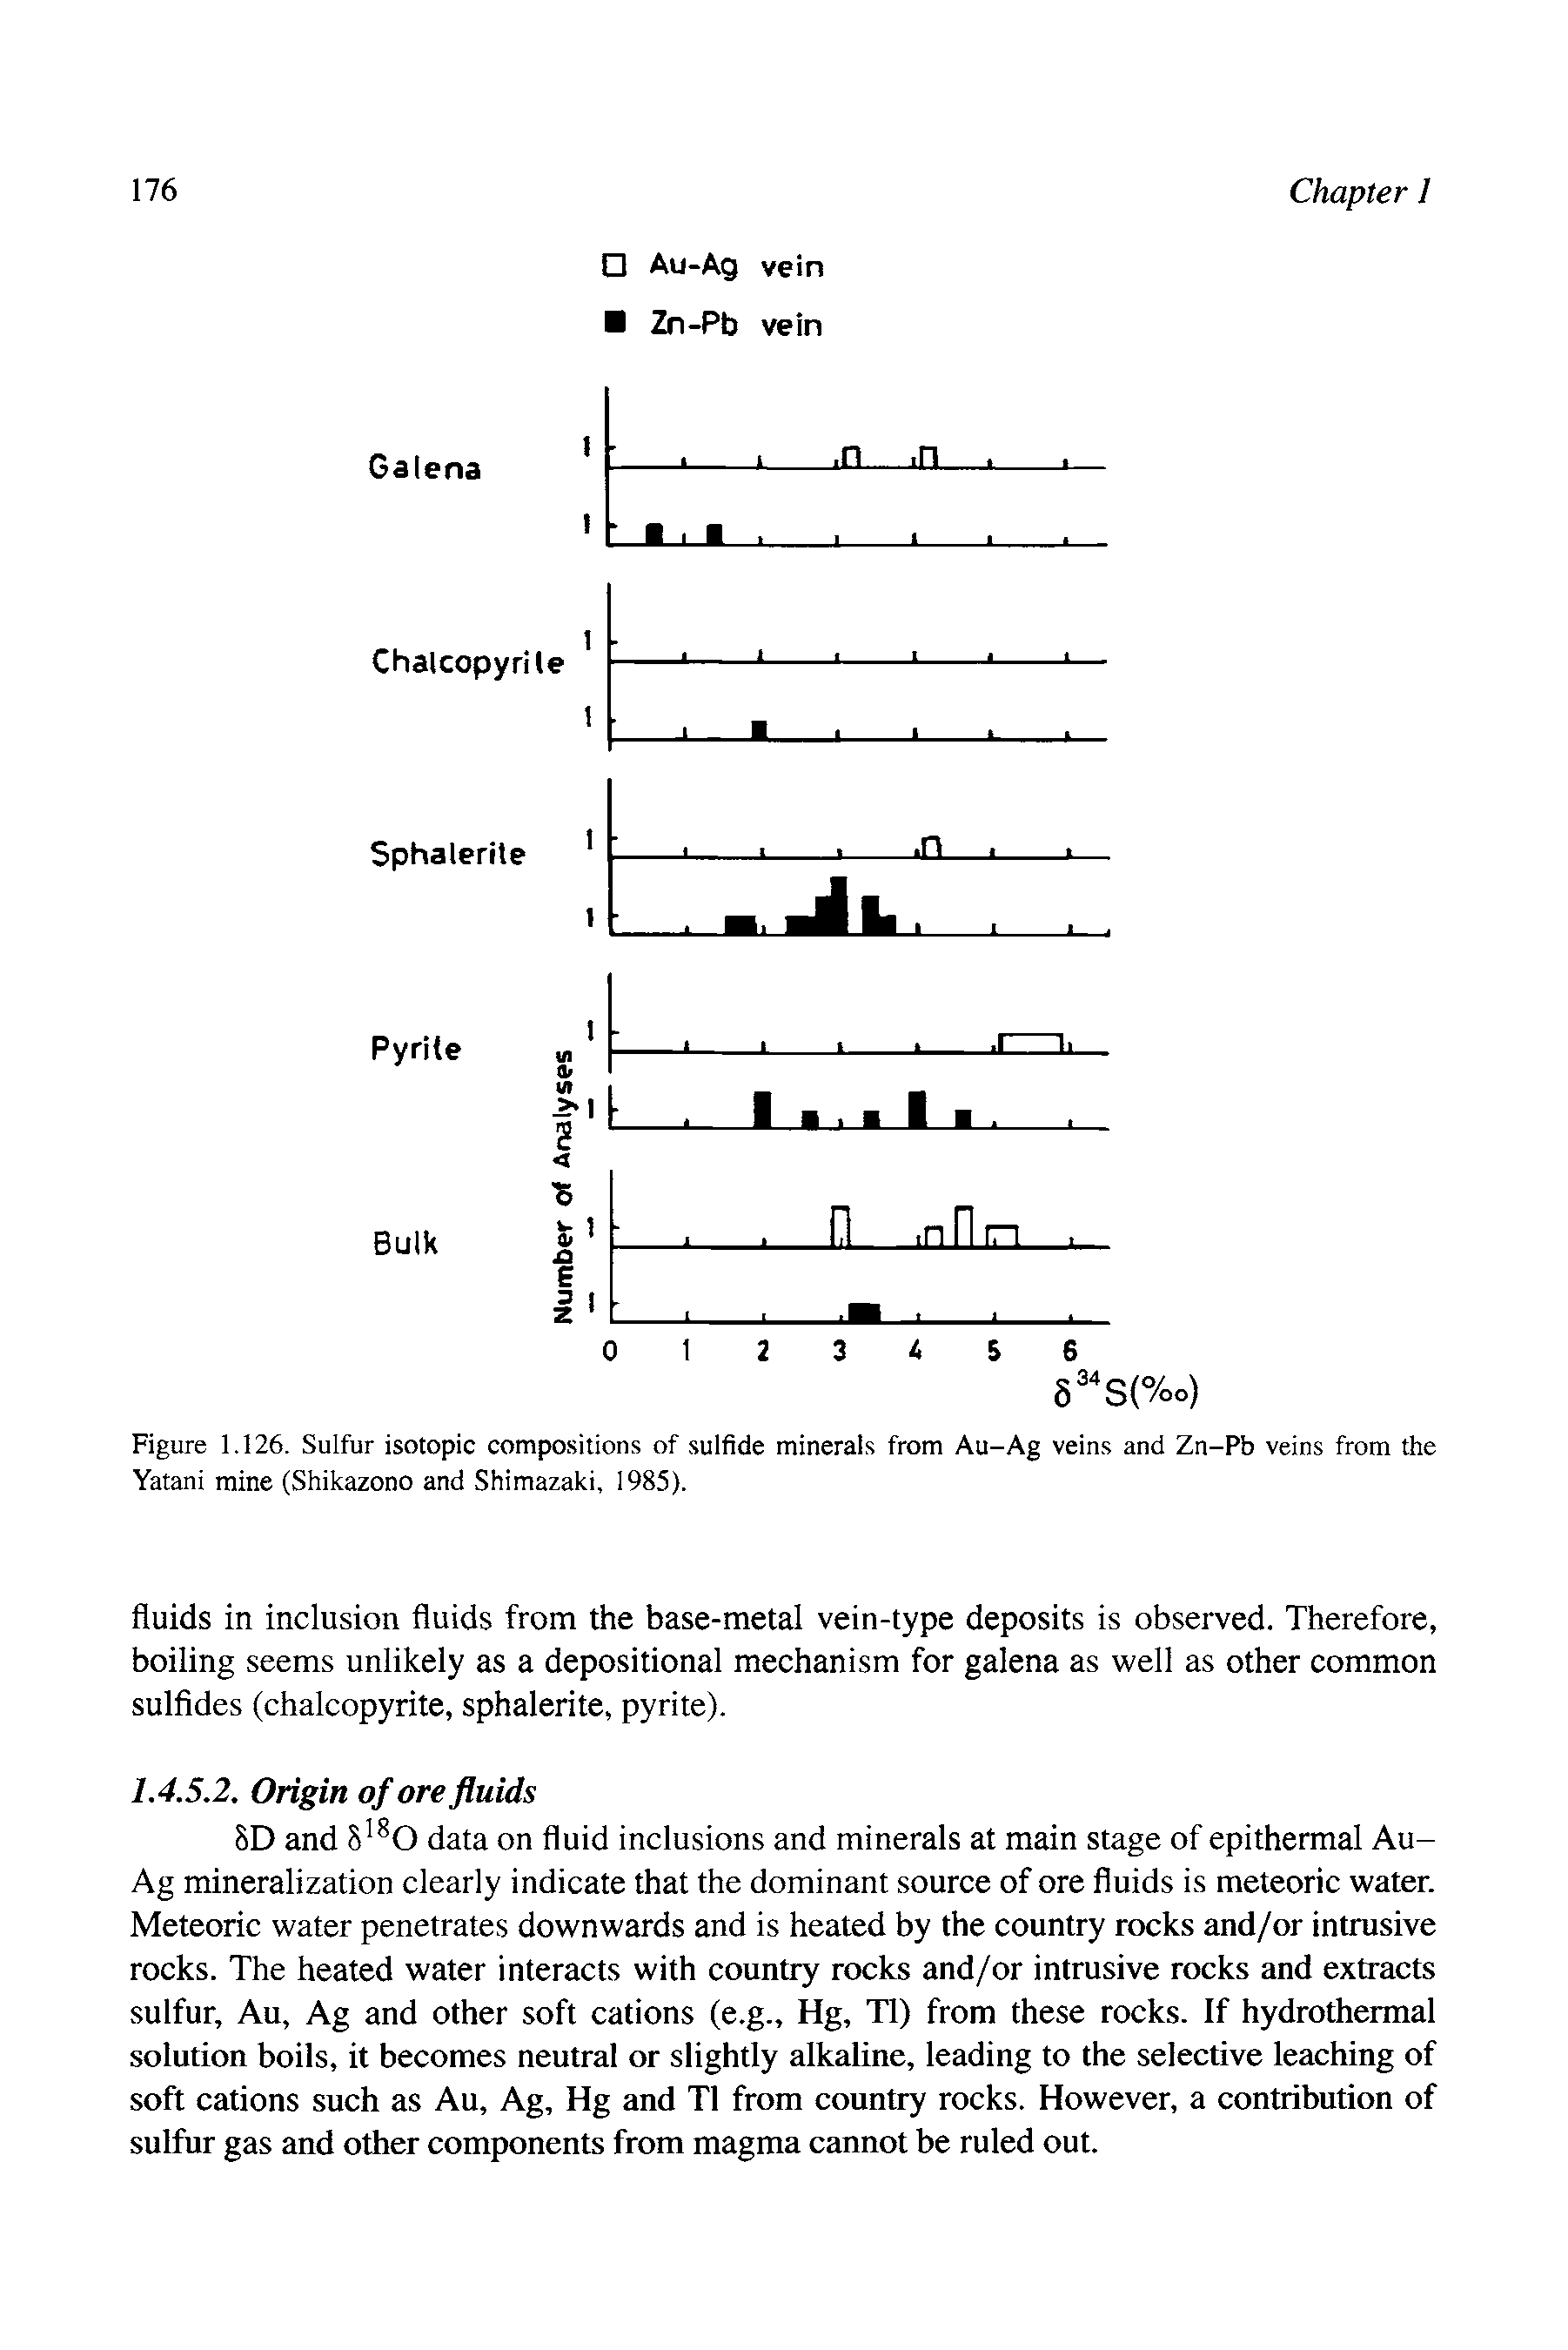 Figure 1.126. Sulfur isotopic compositions of sulfide minerals from Au-Ag veins and Zn-Pb veins from the Yatani mine (Shikazono and Shimazaki, 1985).